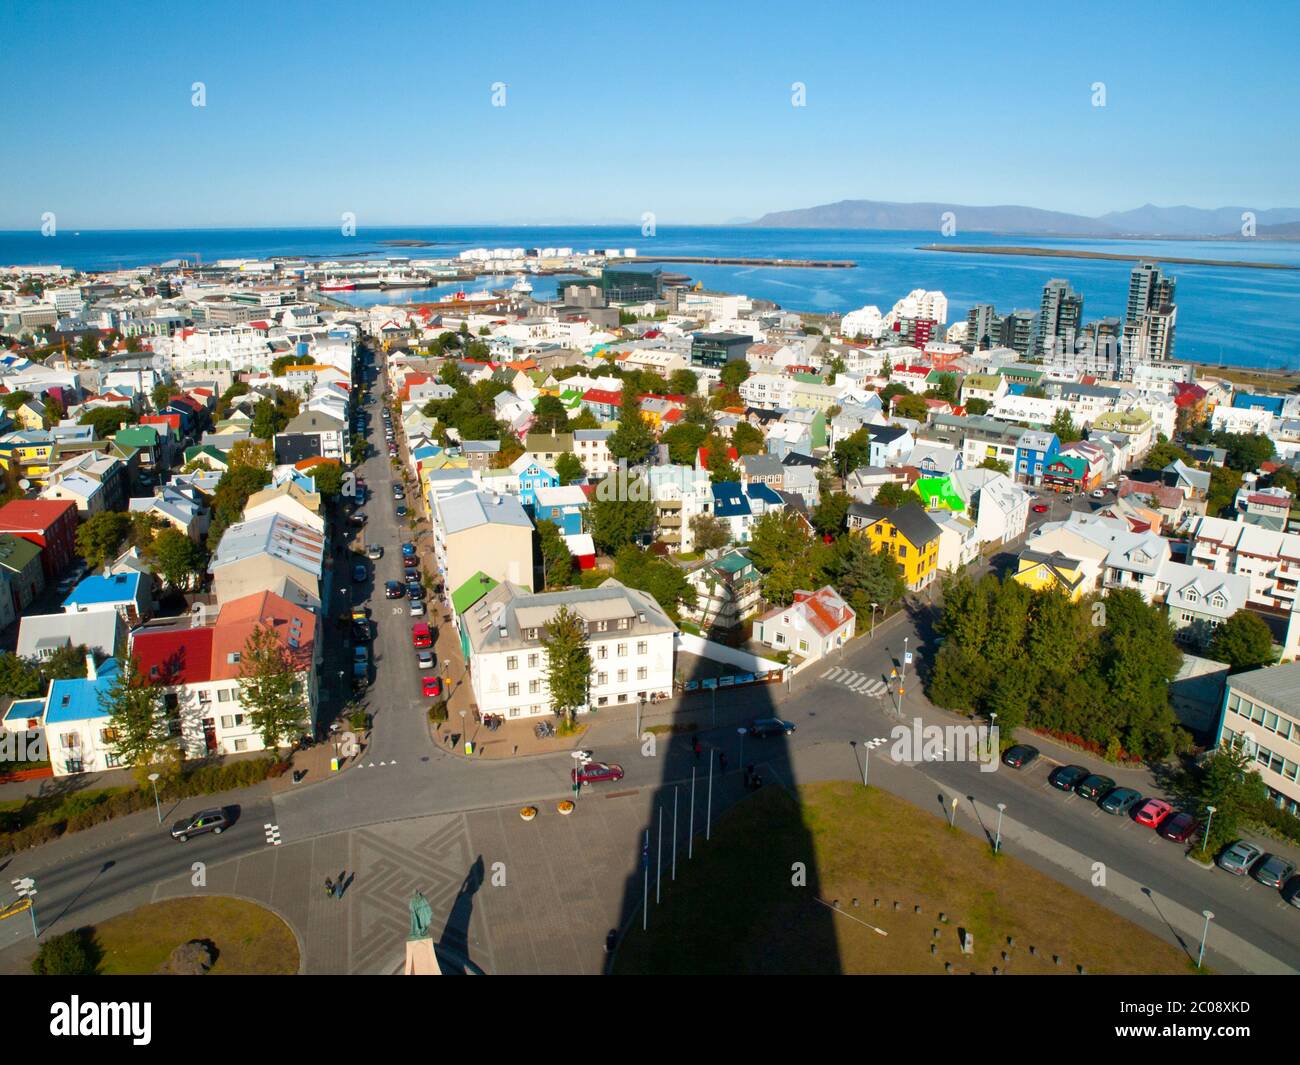 Aerial view of Reykjavik from the top of the Hallgrimskirkja church, Iceland. Stock Photo